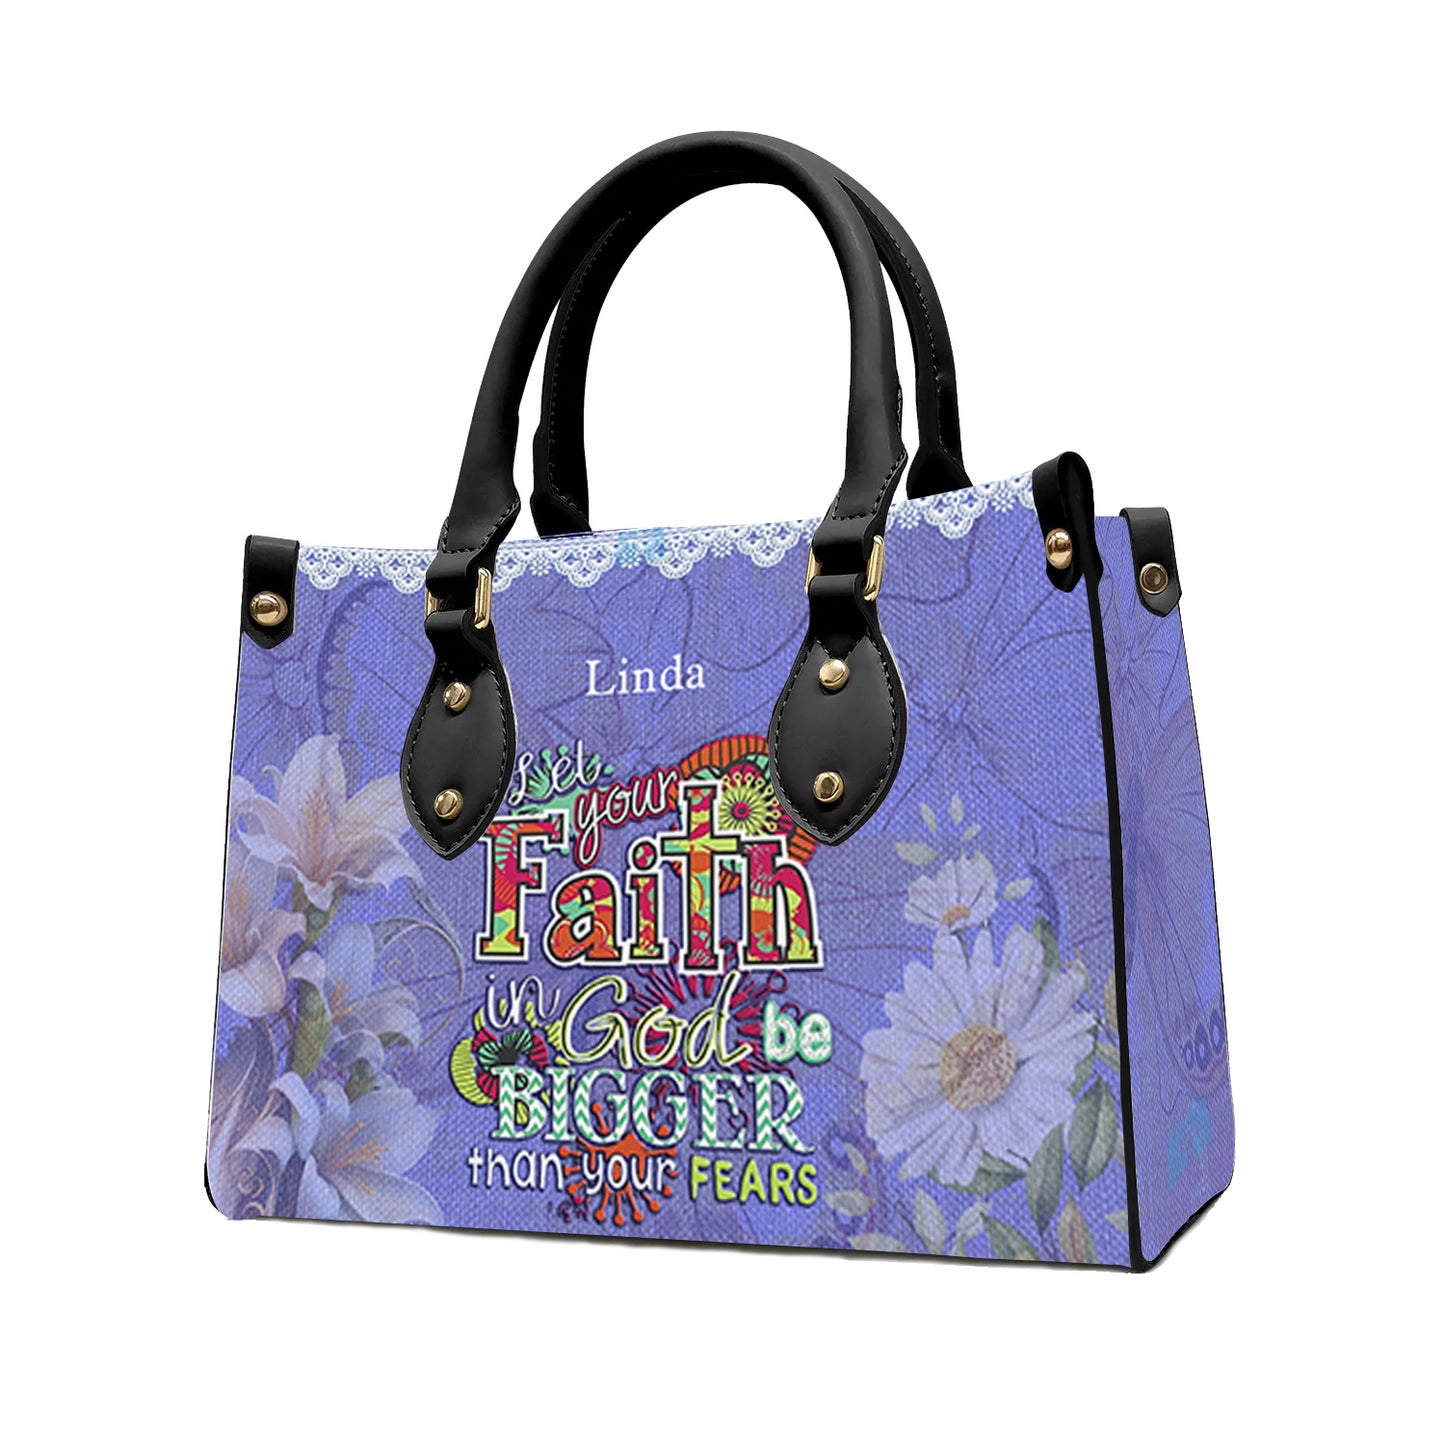 Christianartbag Handbags, Let Your Faith Be Bigger Than Your Fear Leather Handbag Purple, Personalized Bags, Gifts for Women, Christmas Gift, CABLTB01061023. - Christian Art Bag